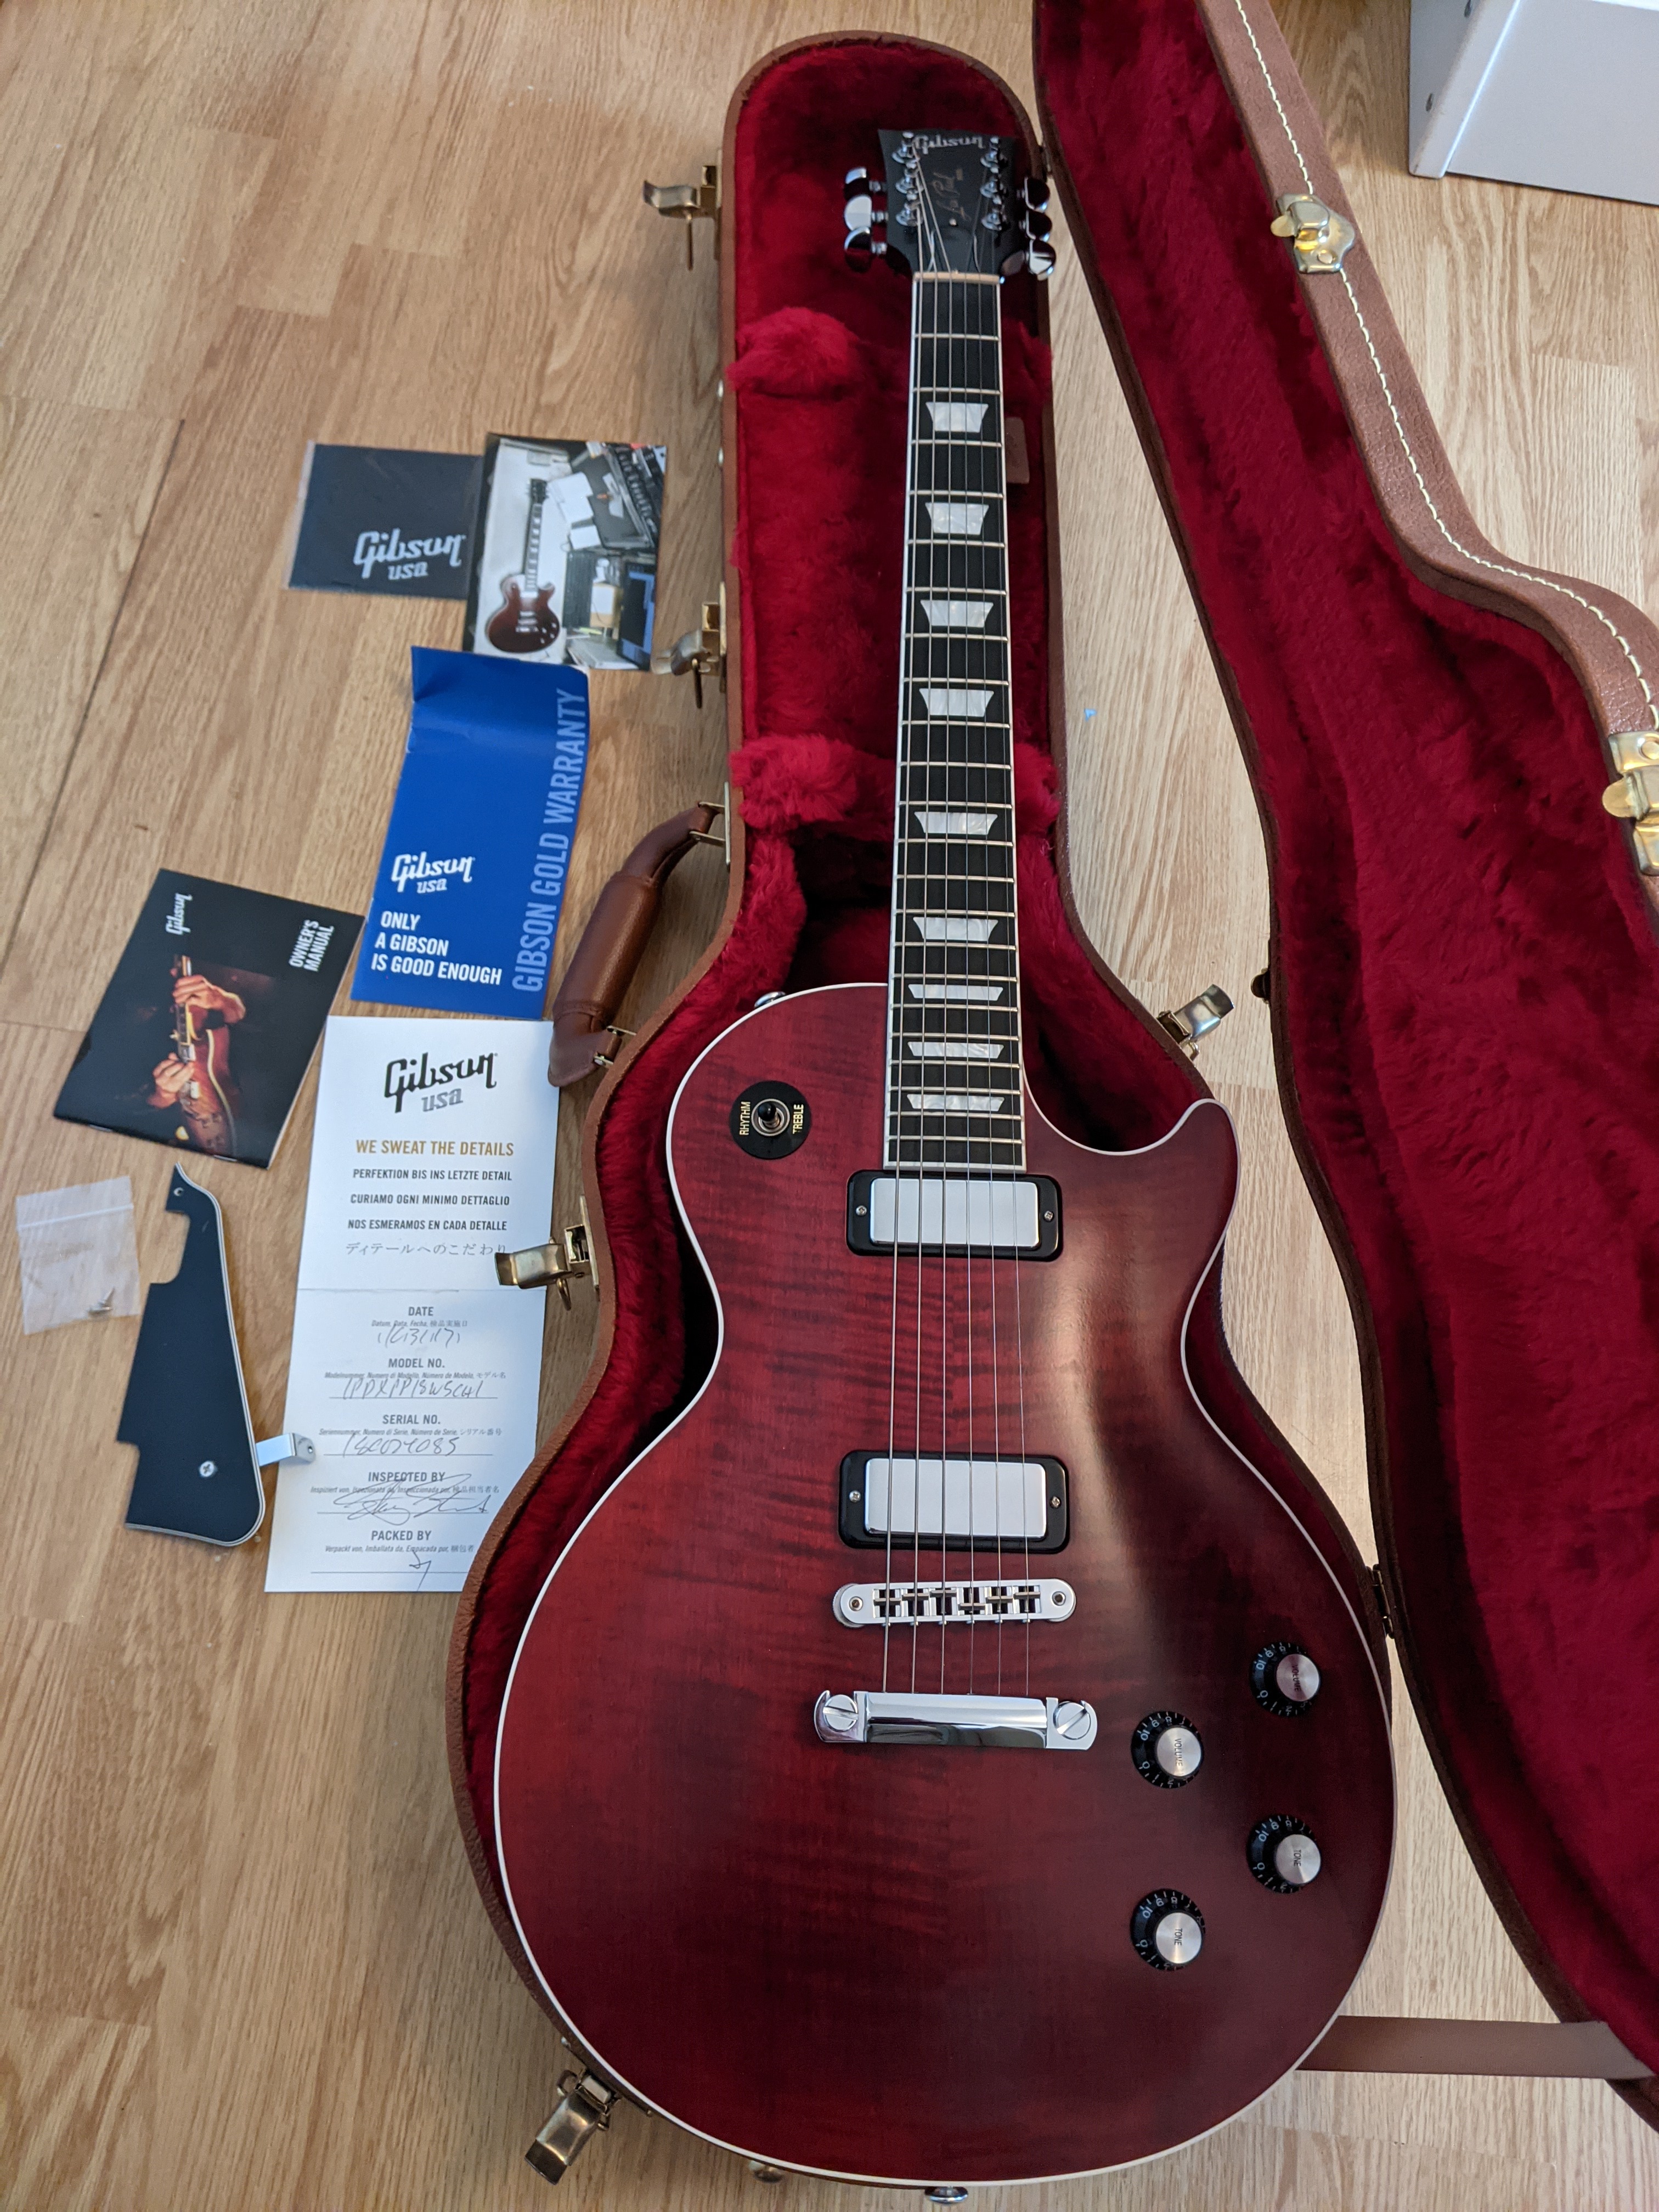 Gibson les Paul deluxe player 2018